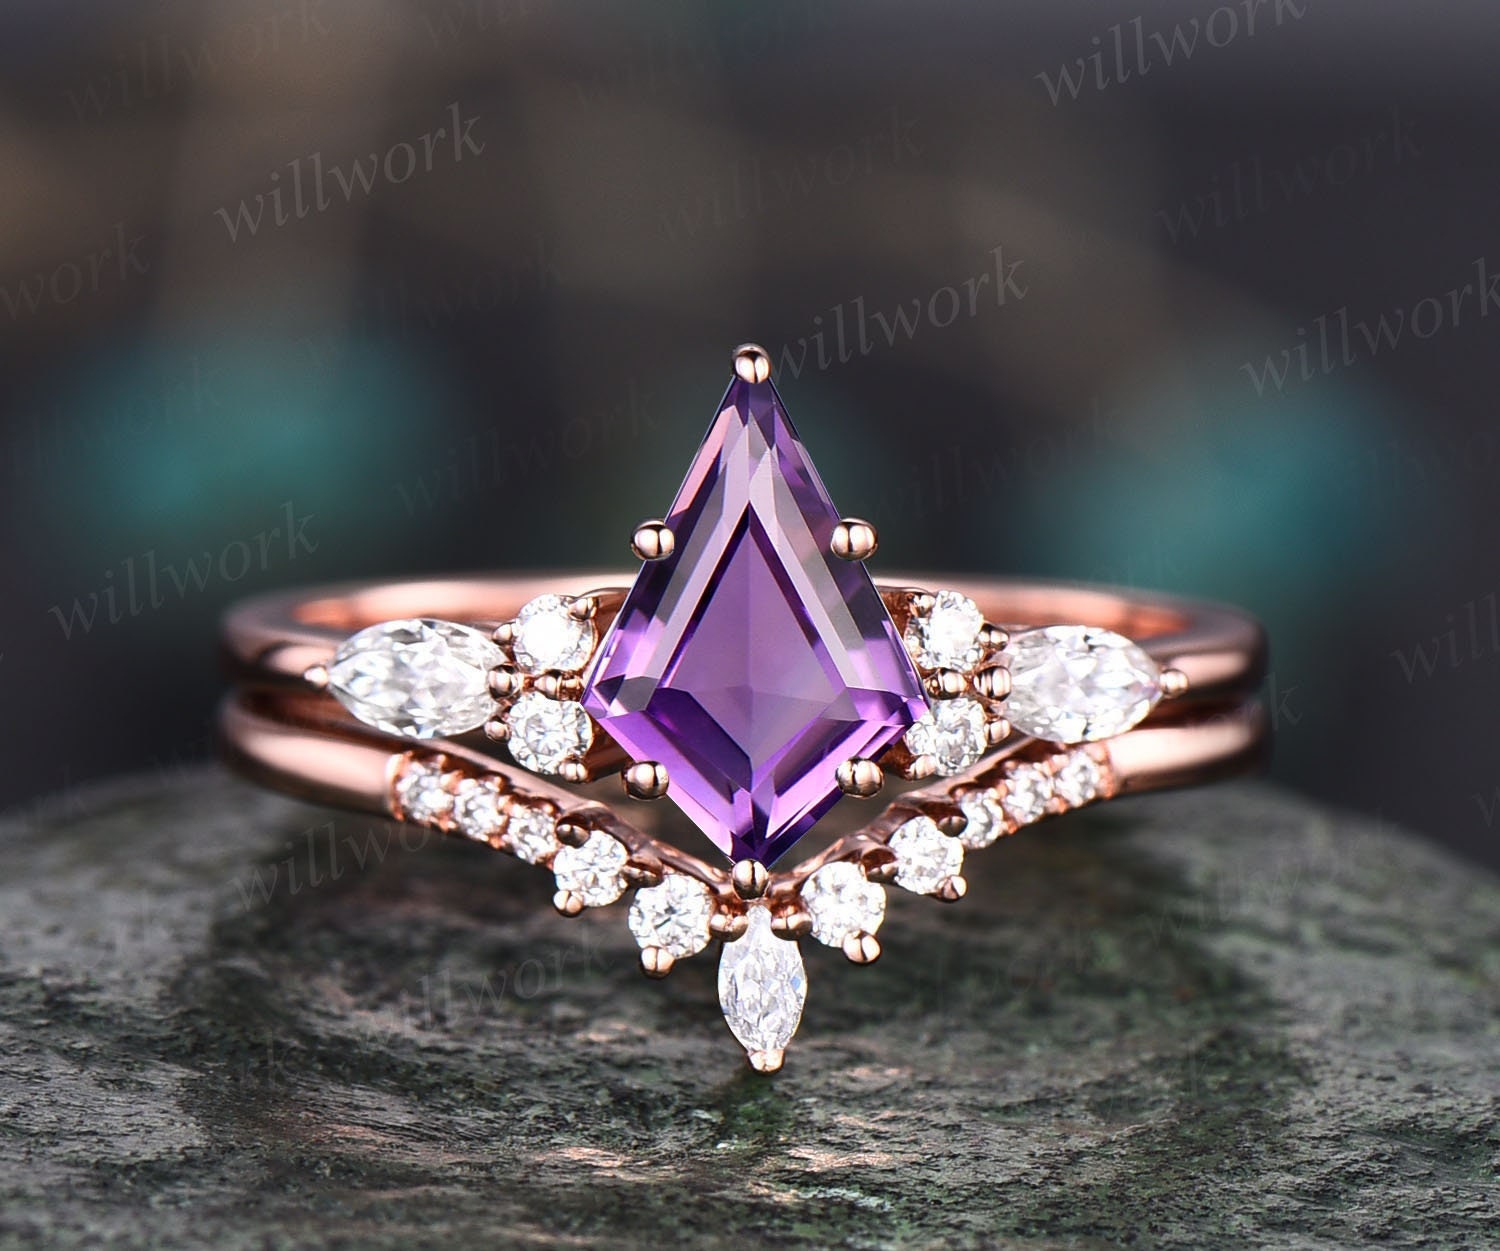 Buy Premium Amethyst Ring, Vermeil Rose Gold Over Sterling Silver Ring,  February Birthstone Ring, Purple Stone Ring, Silver Ring For Women 7.15 ctw  at ShopLC.